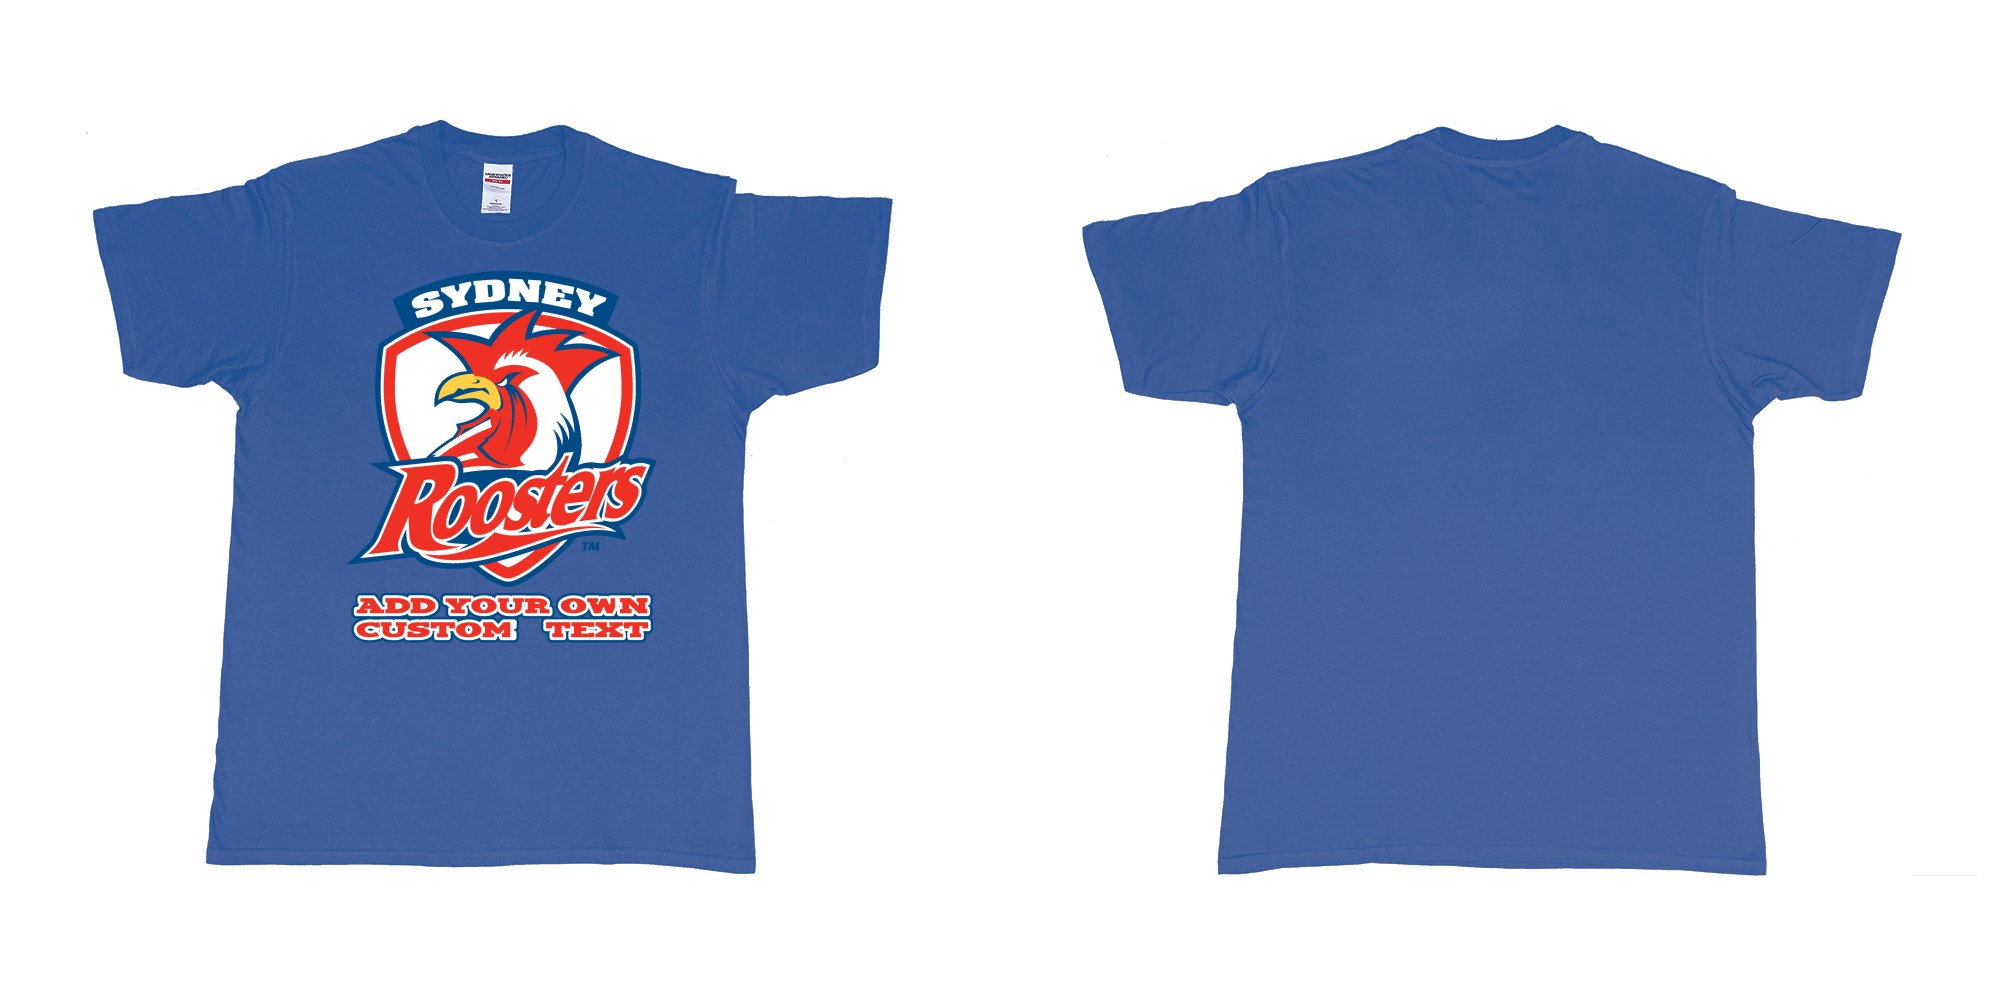 Custom tshirt design sydney roosters custom NRL design in fabric color royal-blue choice your own text made in Bali by The Pirate Way